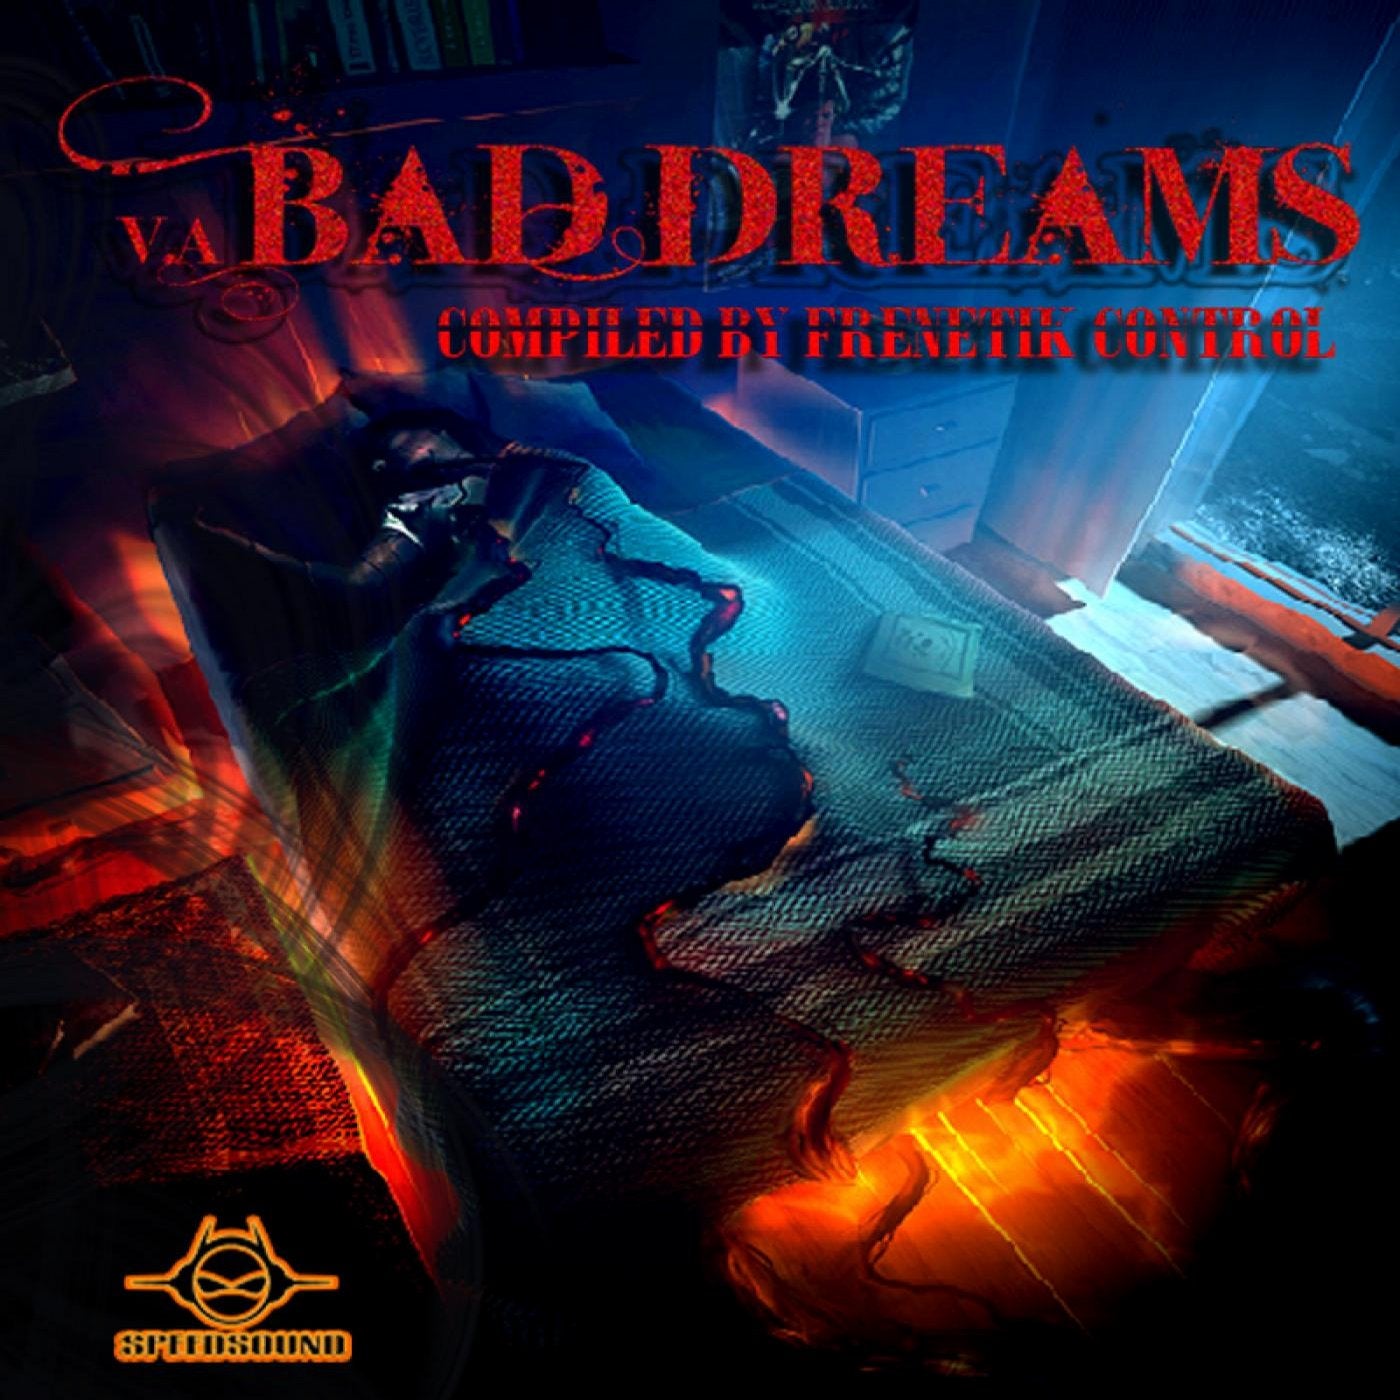 Bad Dreams, compiled by Frenetik Control